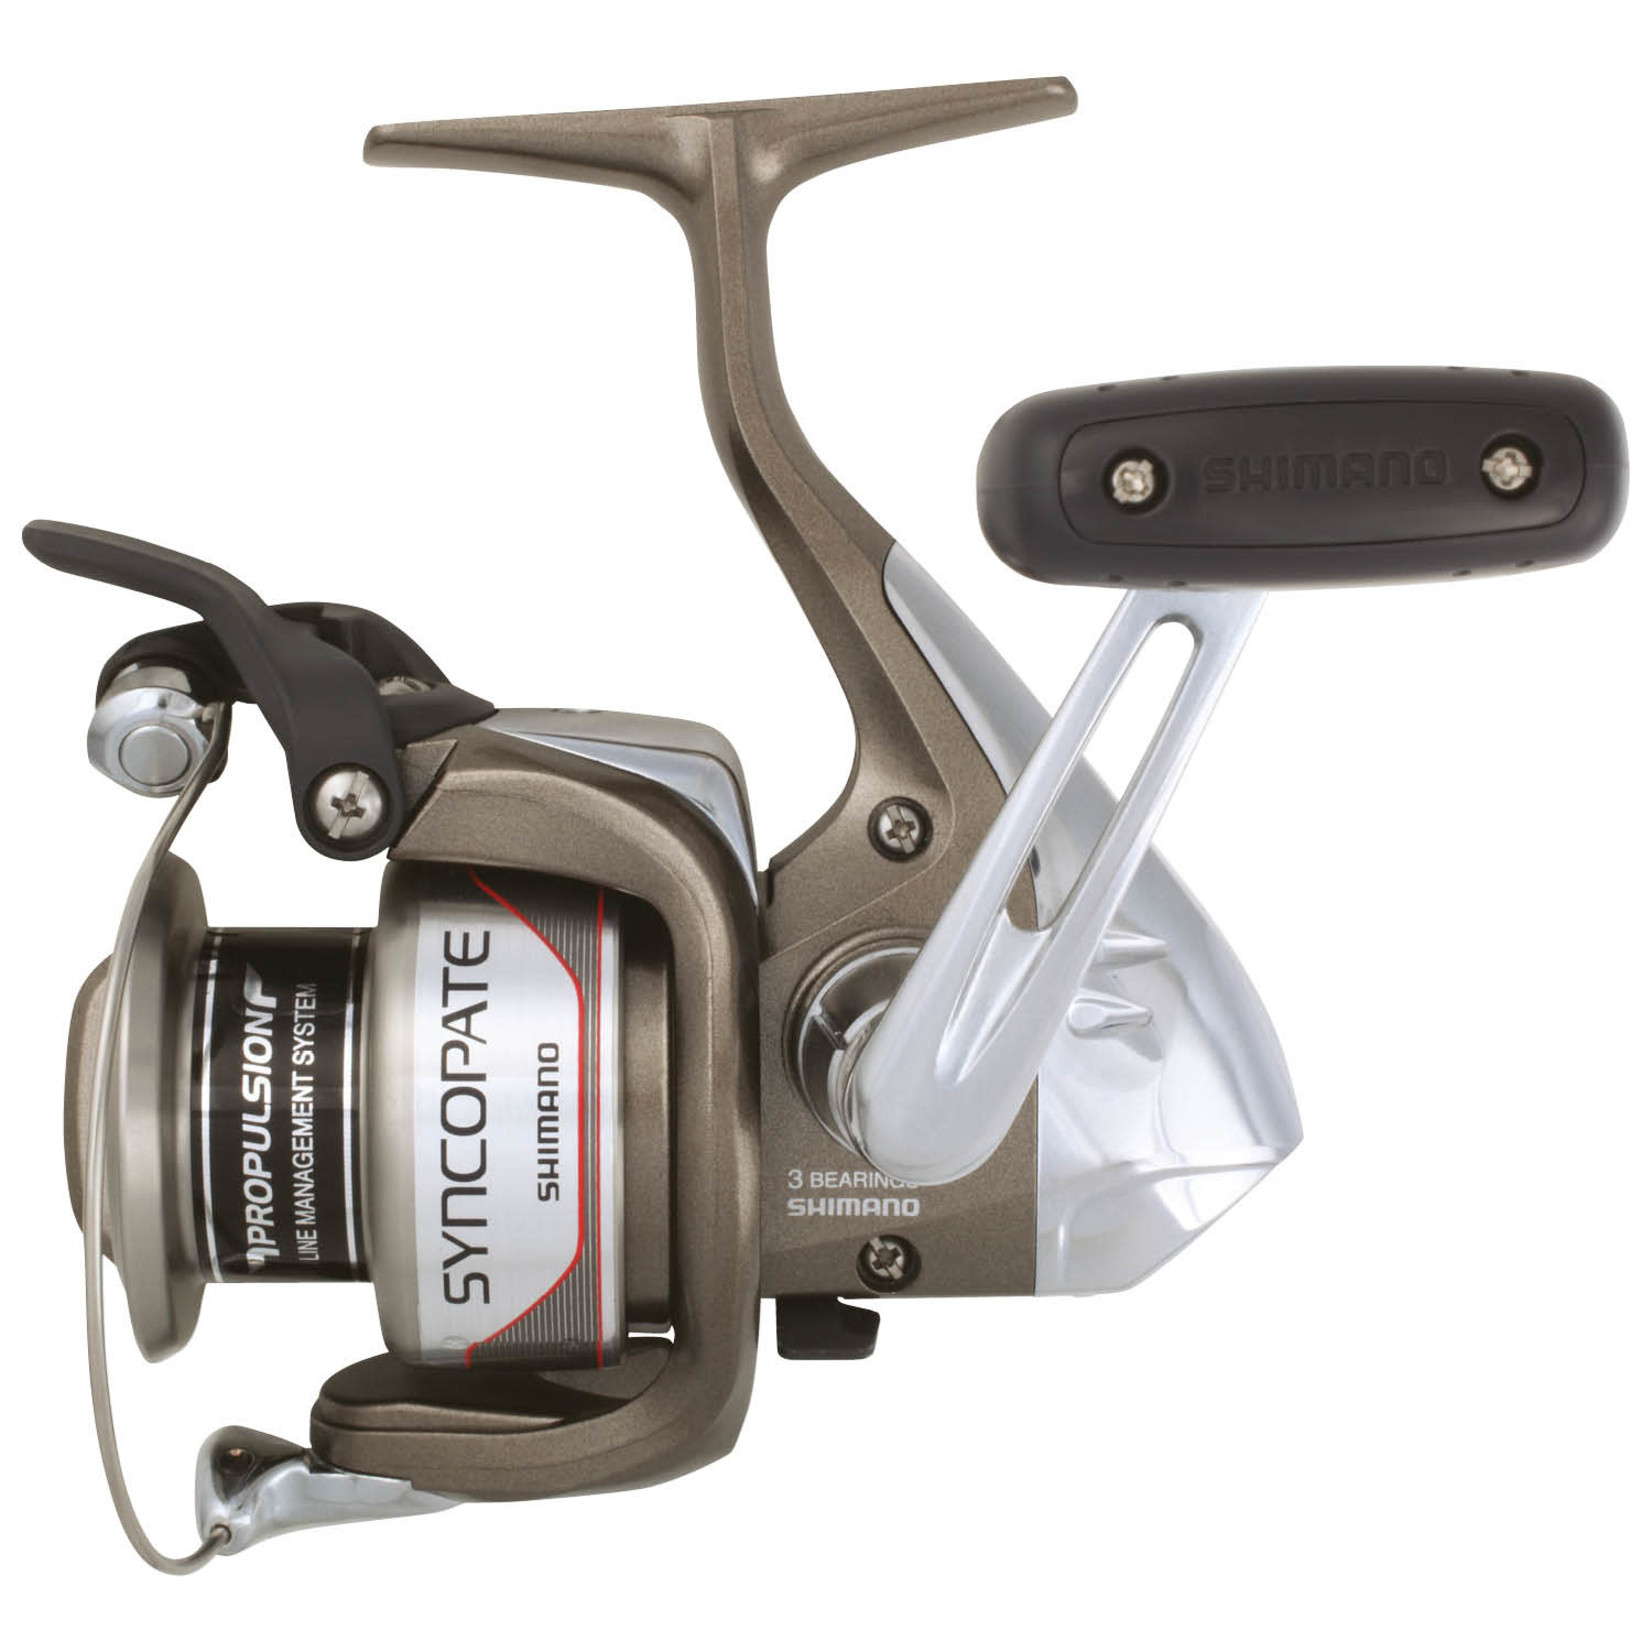 Shimano Shimano SC2500FG Syncopate 2500 Spinning Reel, Quick Fire II, 4BB + 1RB, 5.2:1, Front Drag Box